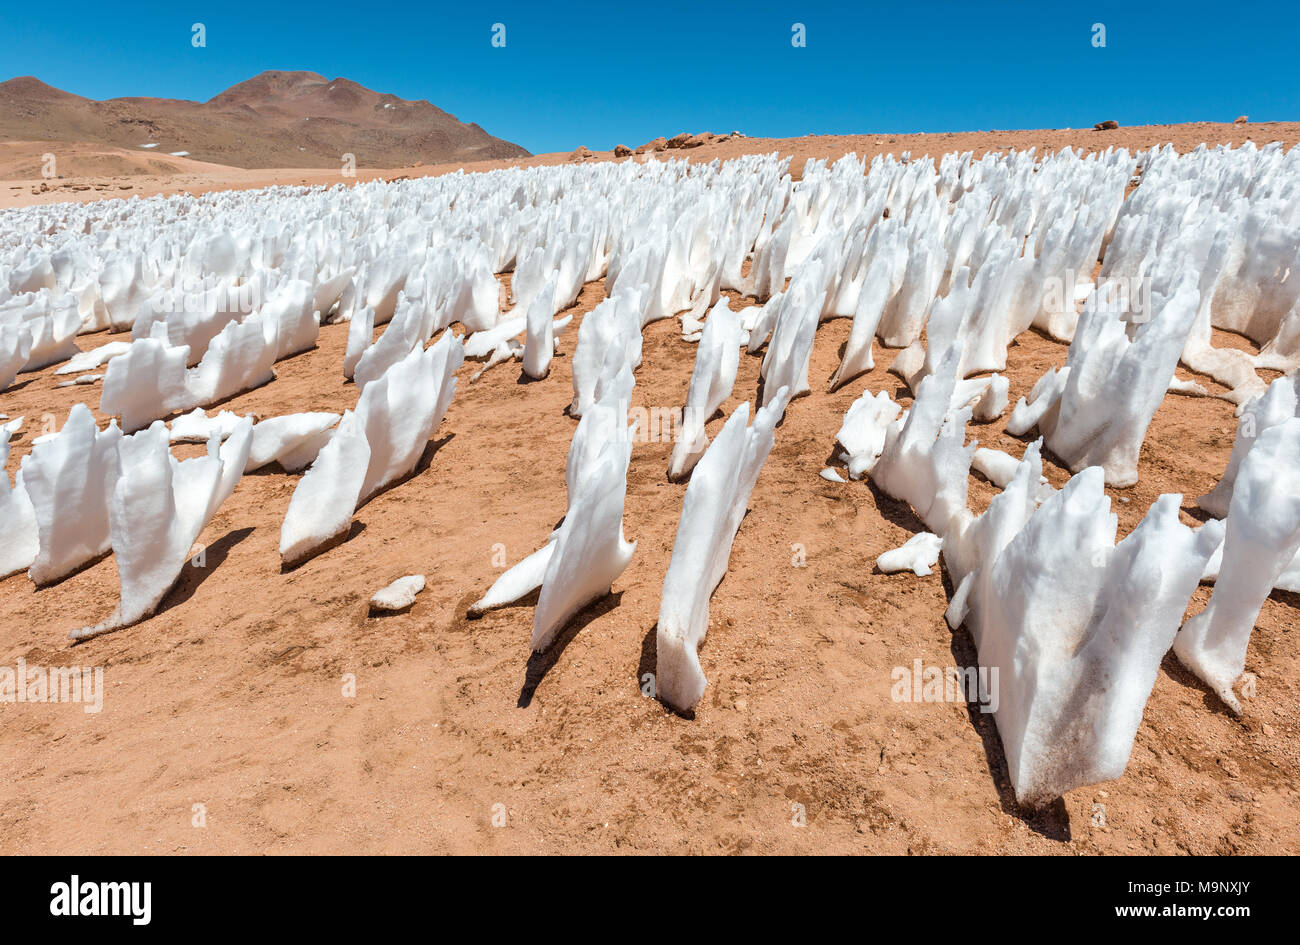 Ice formations due to wind erosion in the Siloli desert located between the Atacama desert of Chile and the Uyuni salt flat, Bolivia, South America. Stock Photo